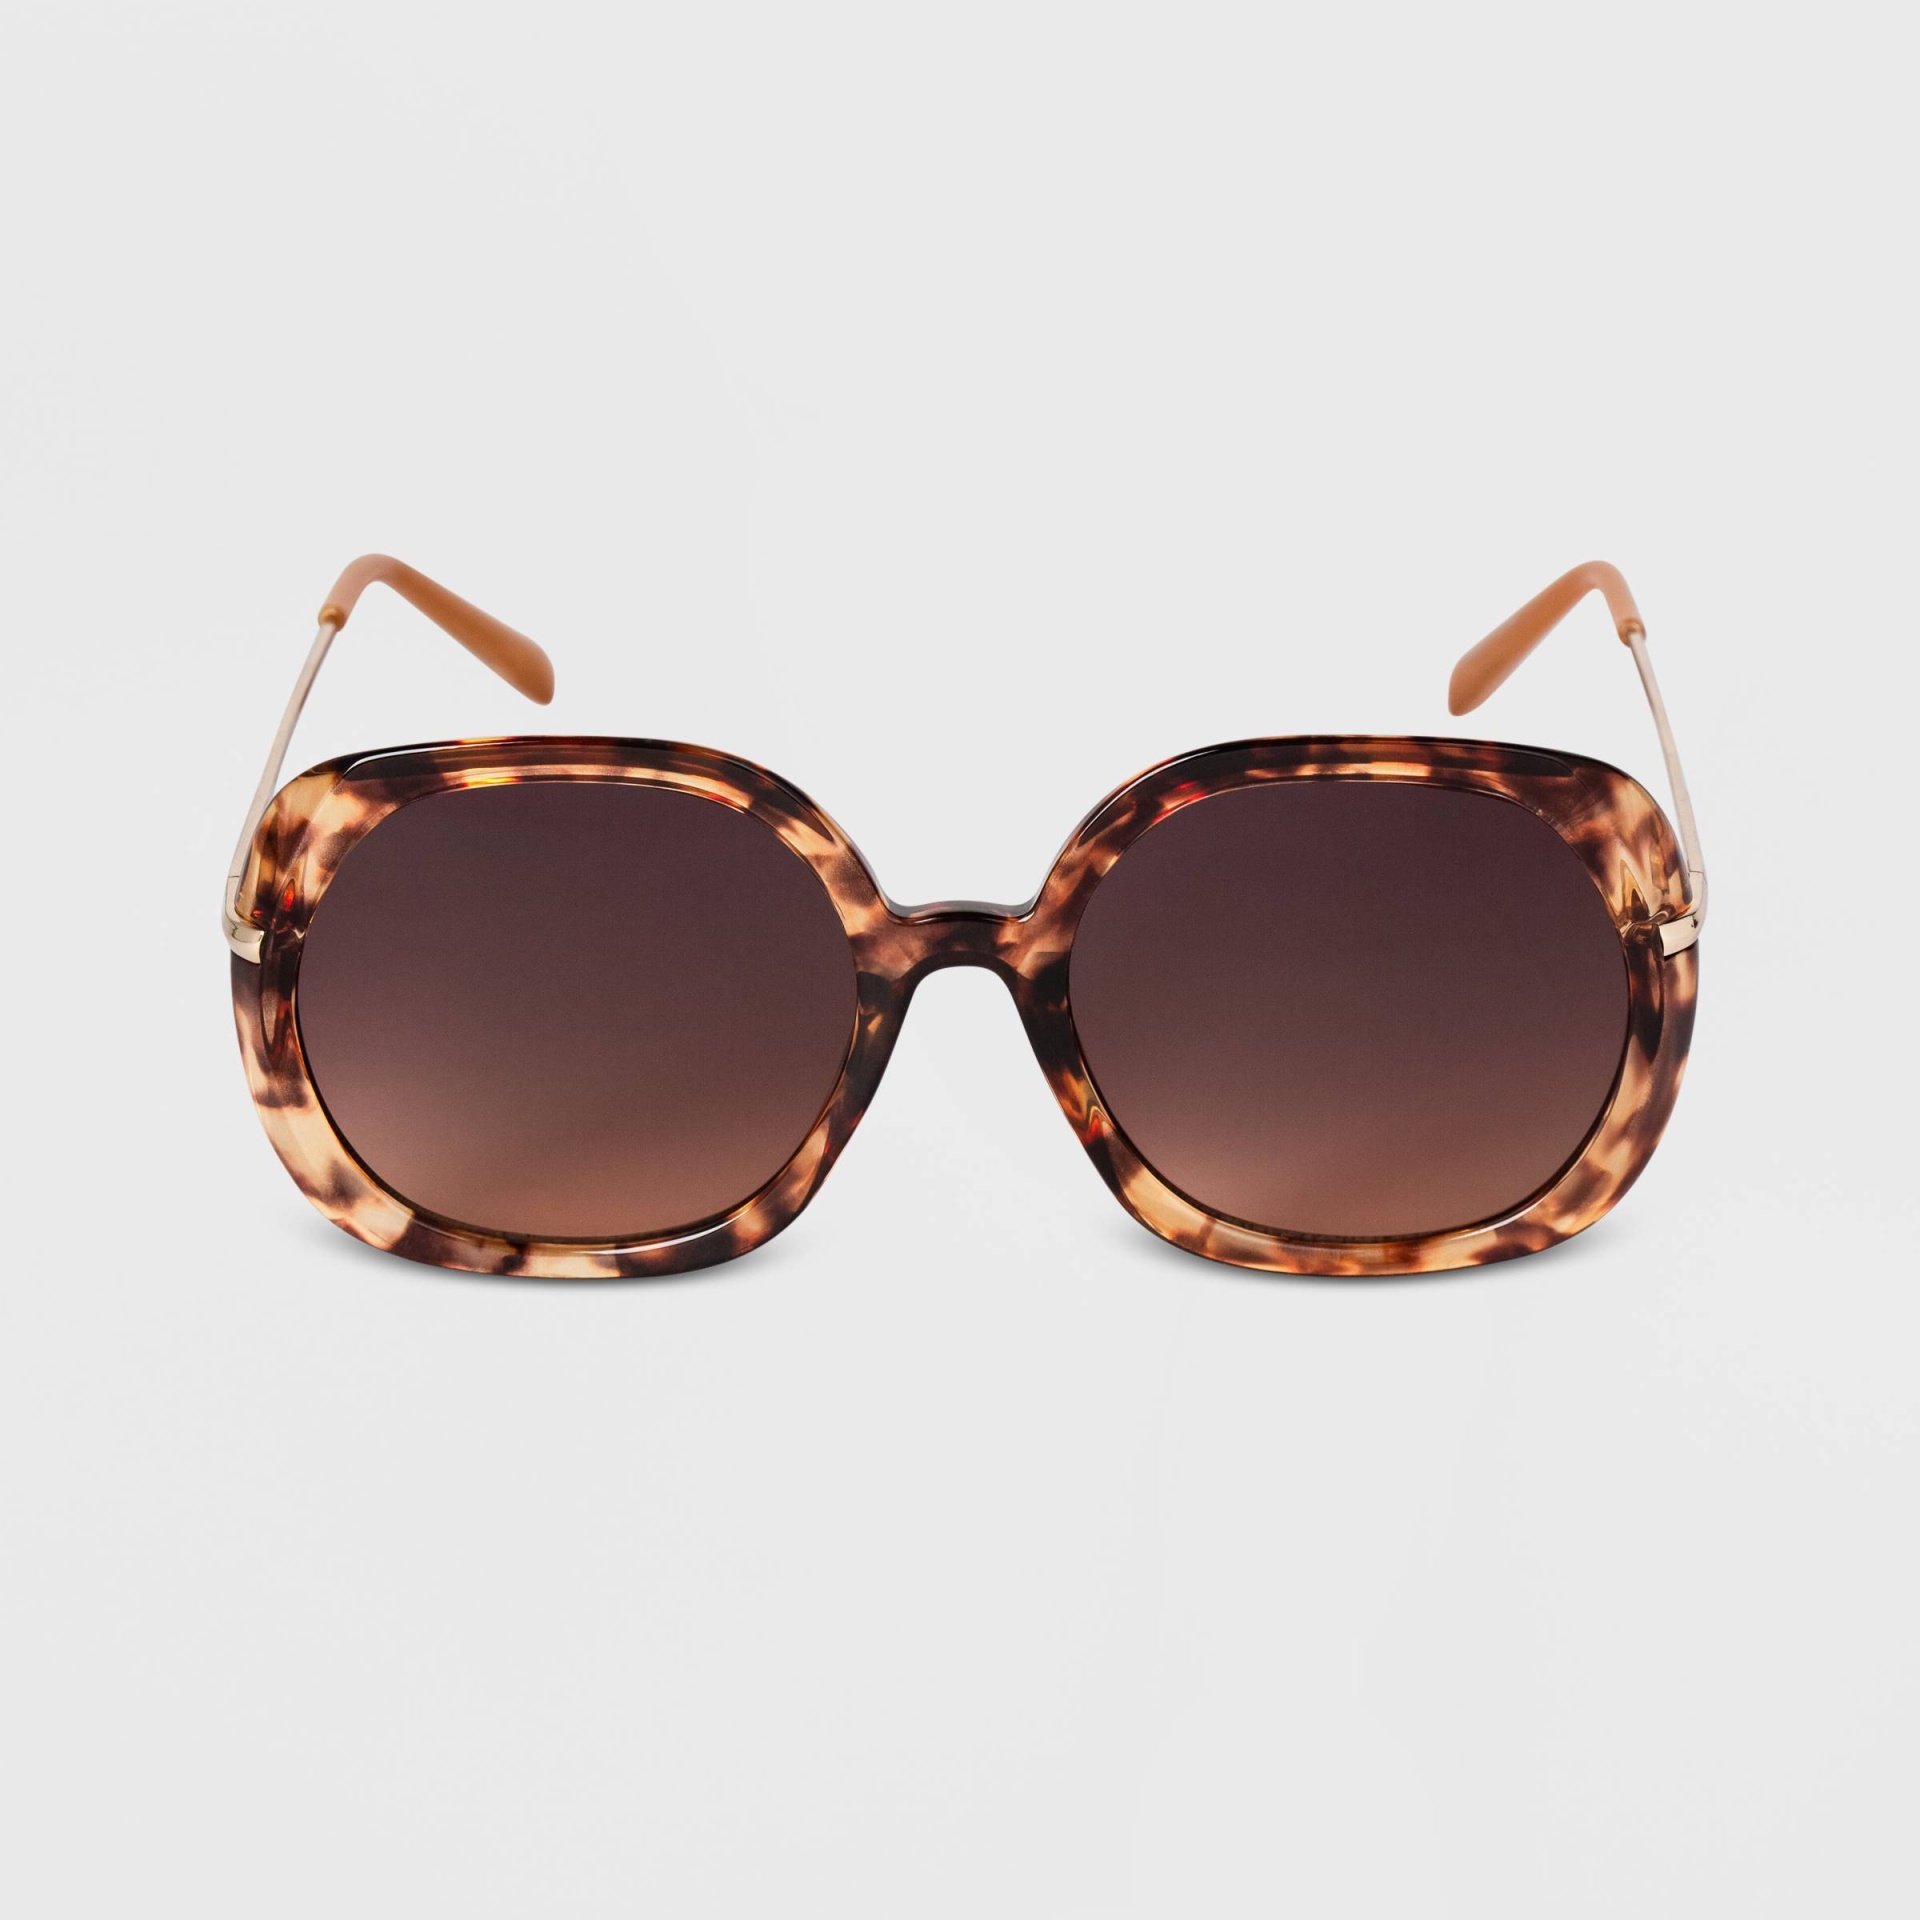 slide 1 of 2, Women's Crystal Tortoise Shell Oversized Round Sunglasses - A New Day Brown, 1 ct